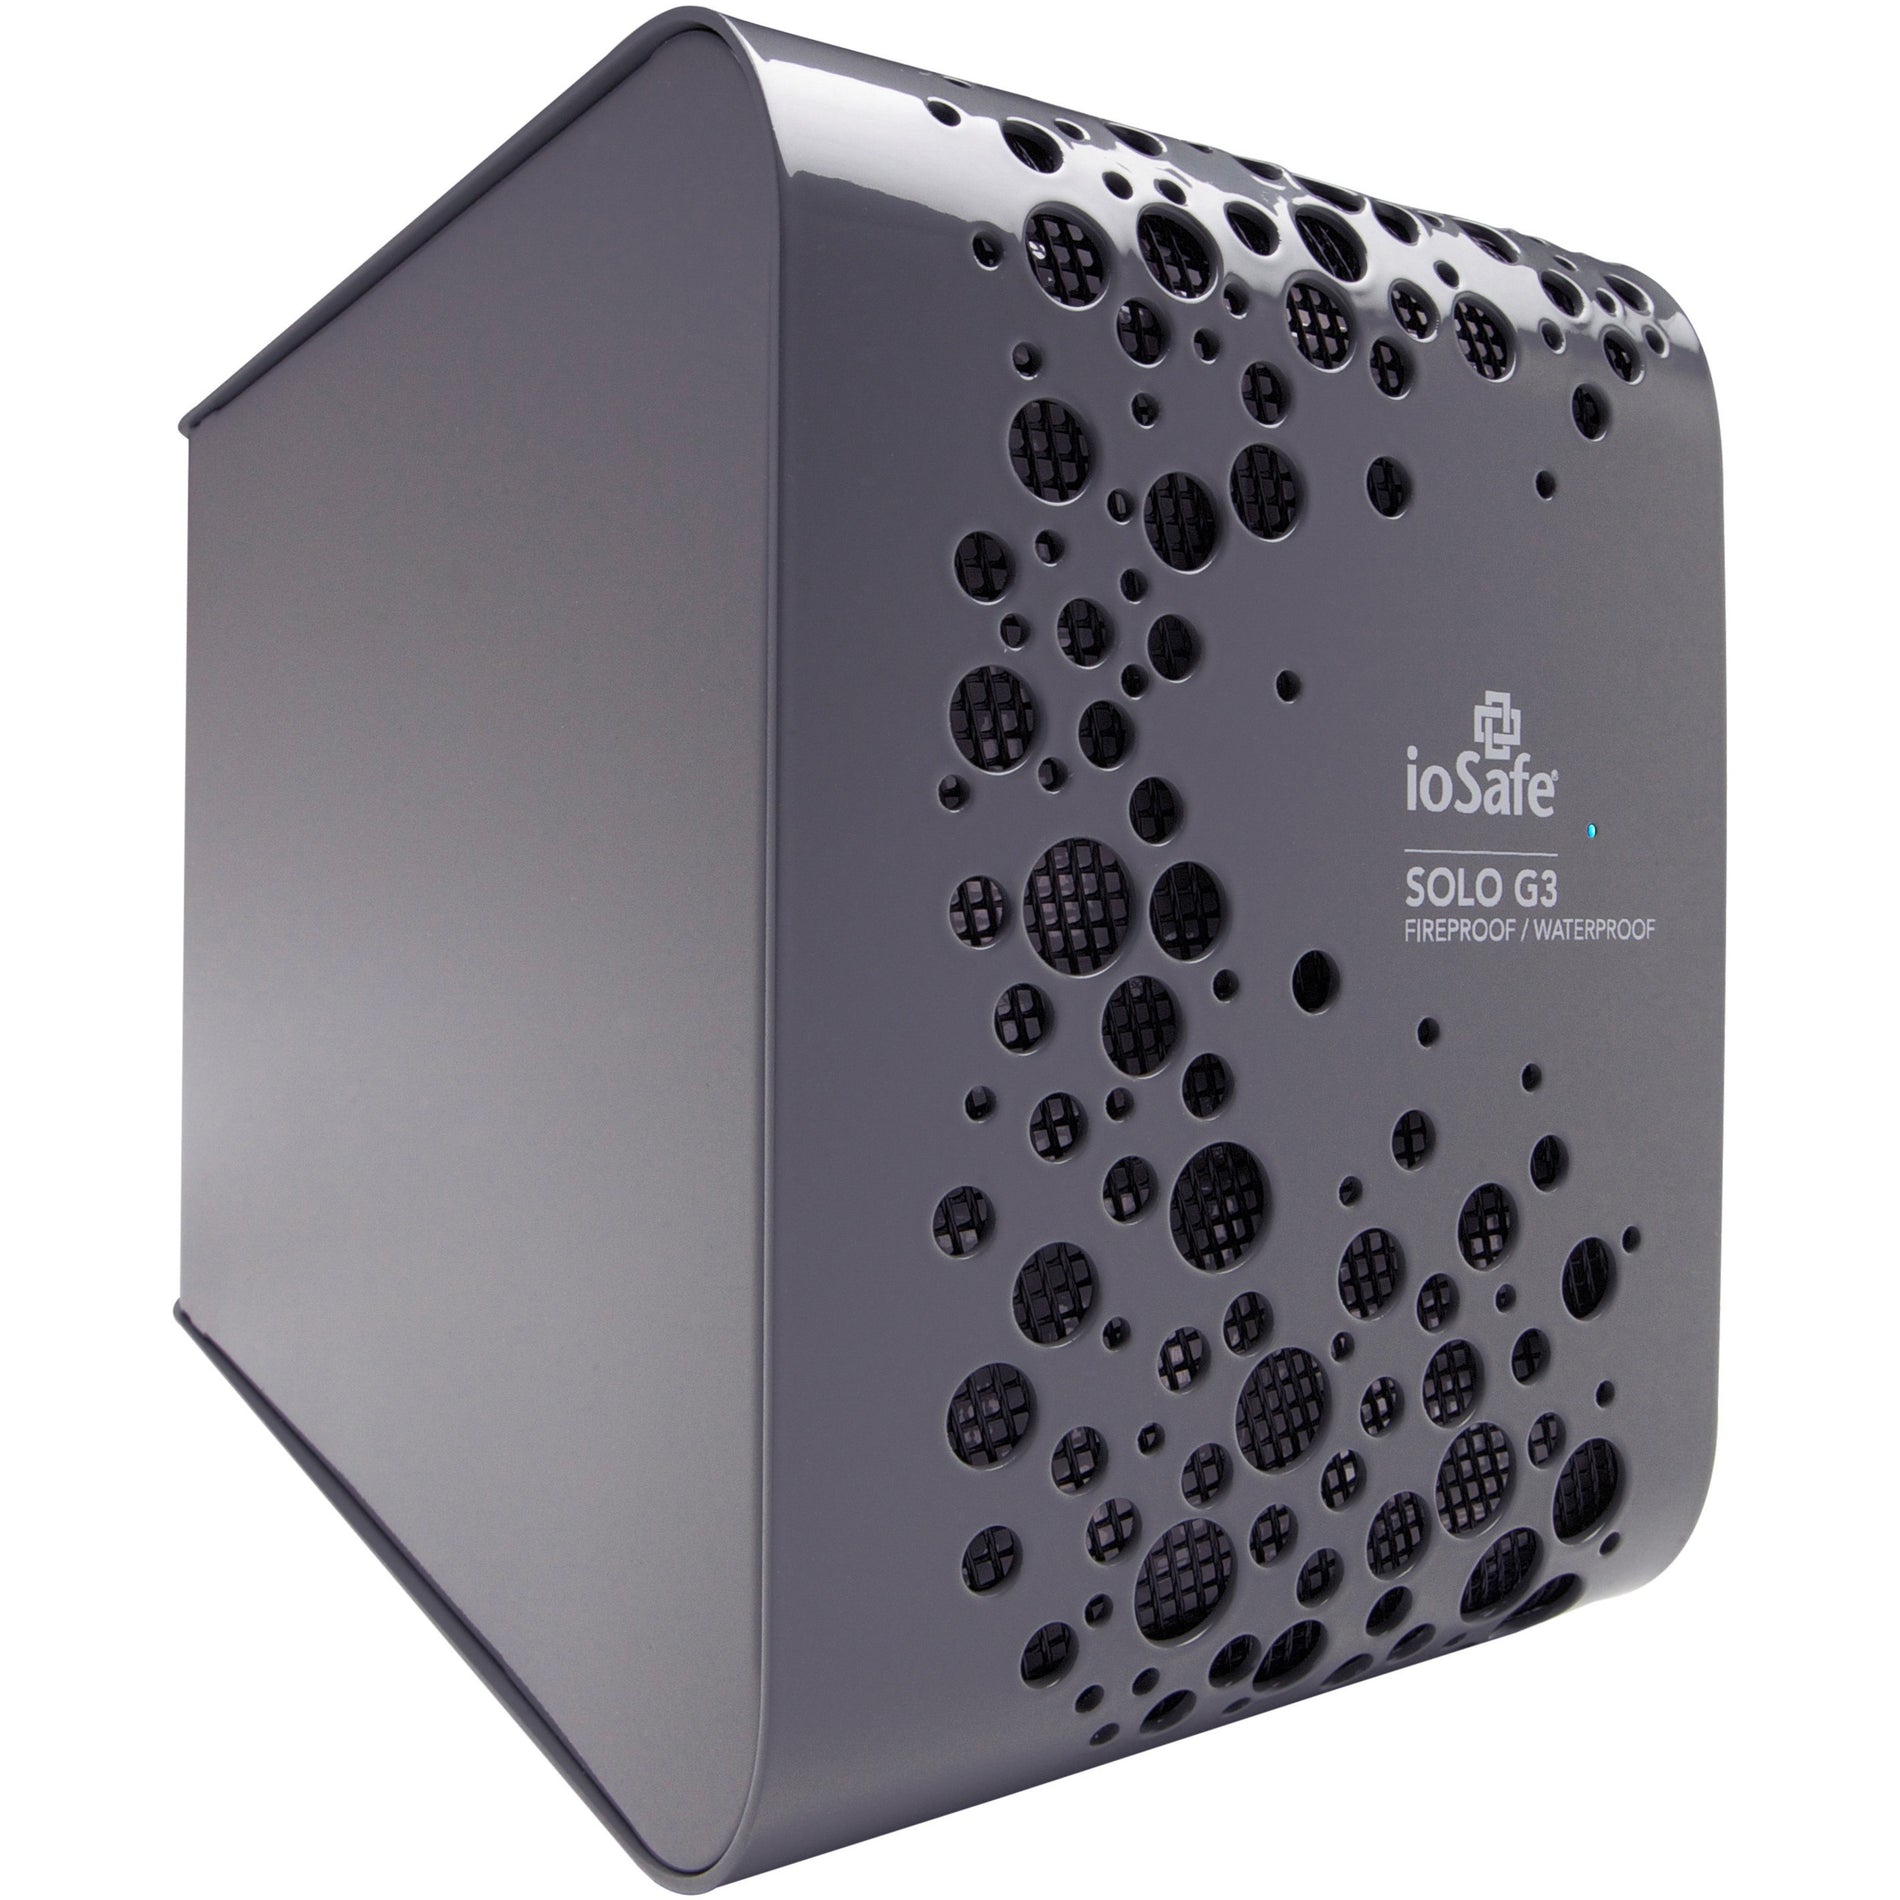 ioSafe SK3TB Solo G3 3 TB USB 3.0 Fireproof and Waterproof External Hard Drive, Data Recovery Service Included